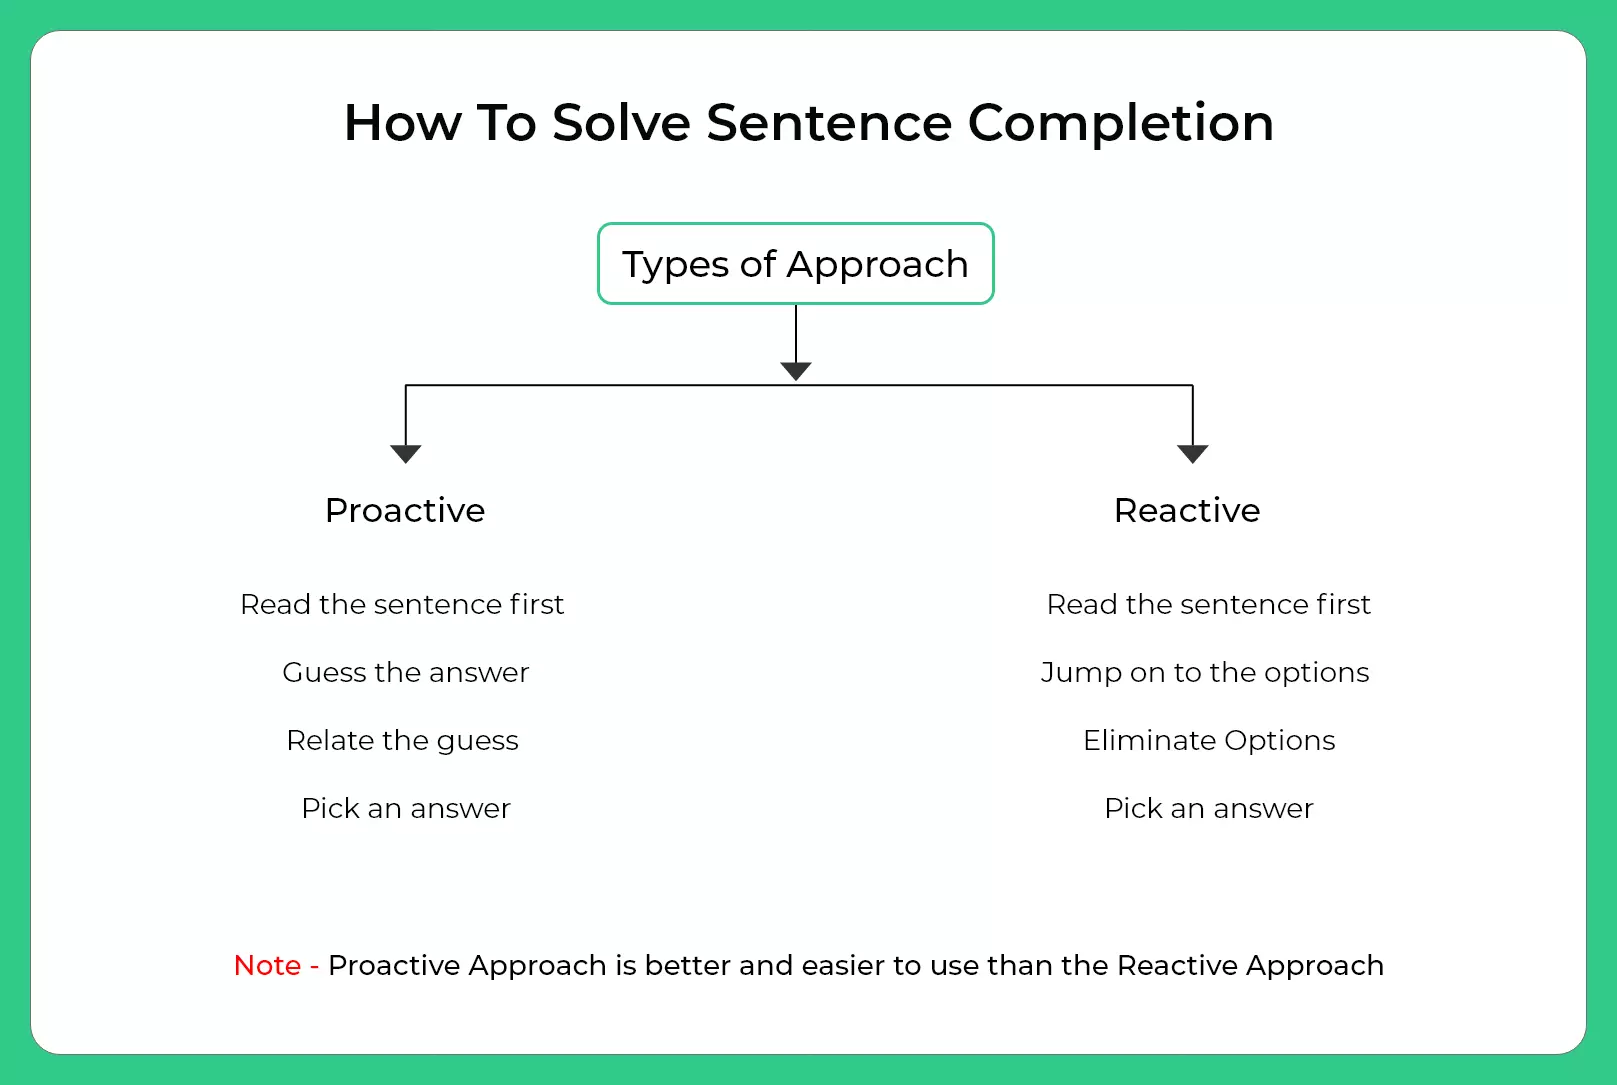 How To Solve Sentence Completion